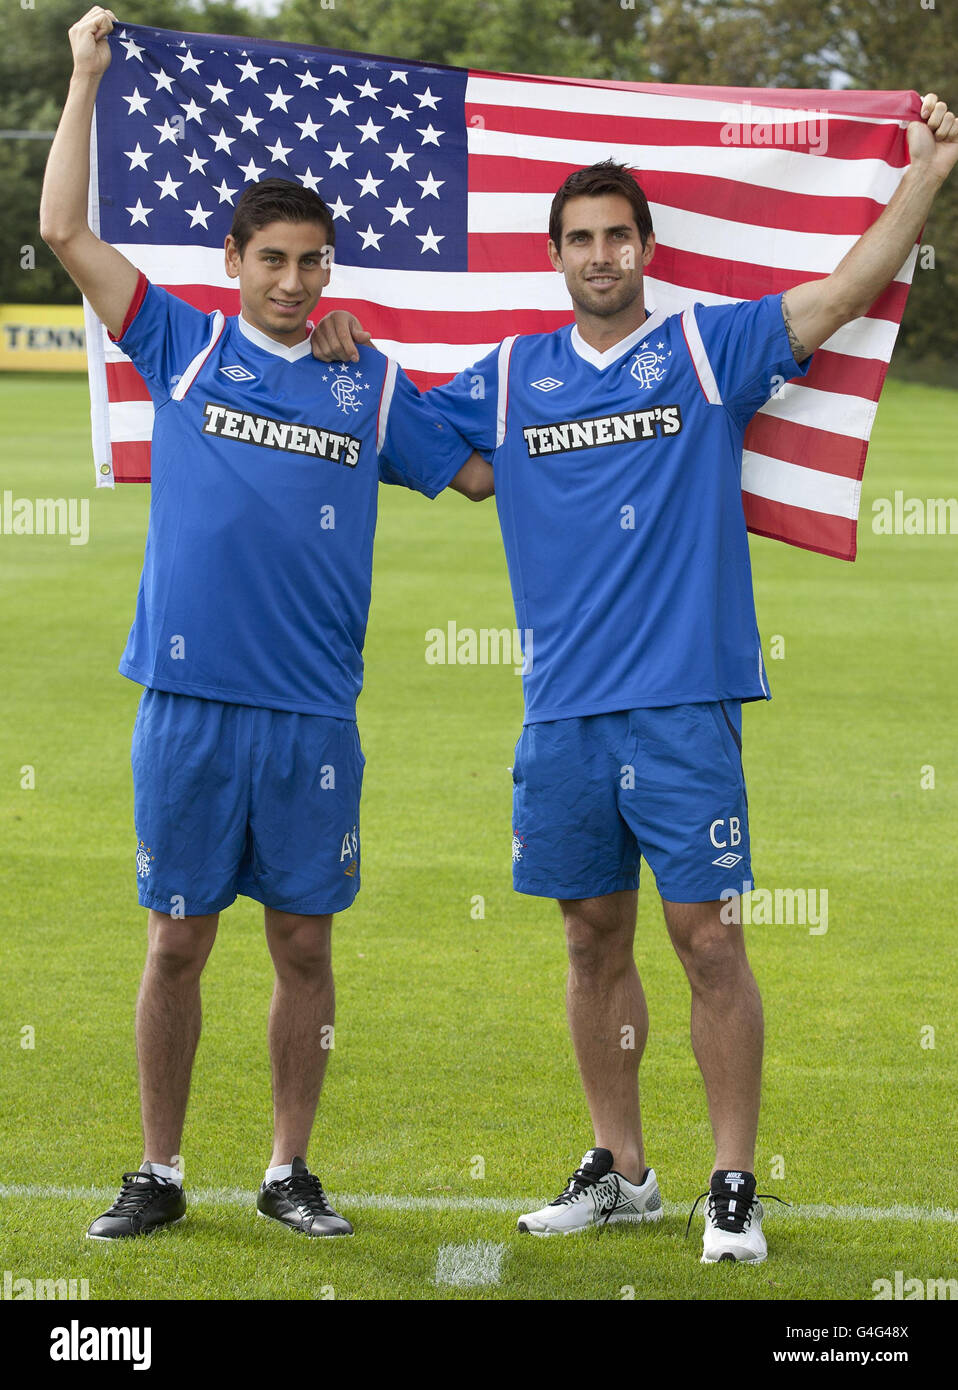 Rangers' new signings Alejandro Bedoya and Carlos Bocanegra (right) pose during a photocall at Murray Park, Glasgow. Picture date:Wednesday August 24, 2011. Photo credit should read: Aileen Wilson/Rangers FC/PA. Stock Photo